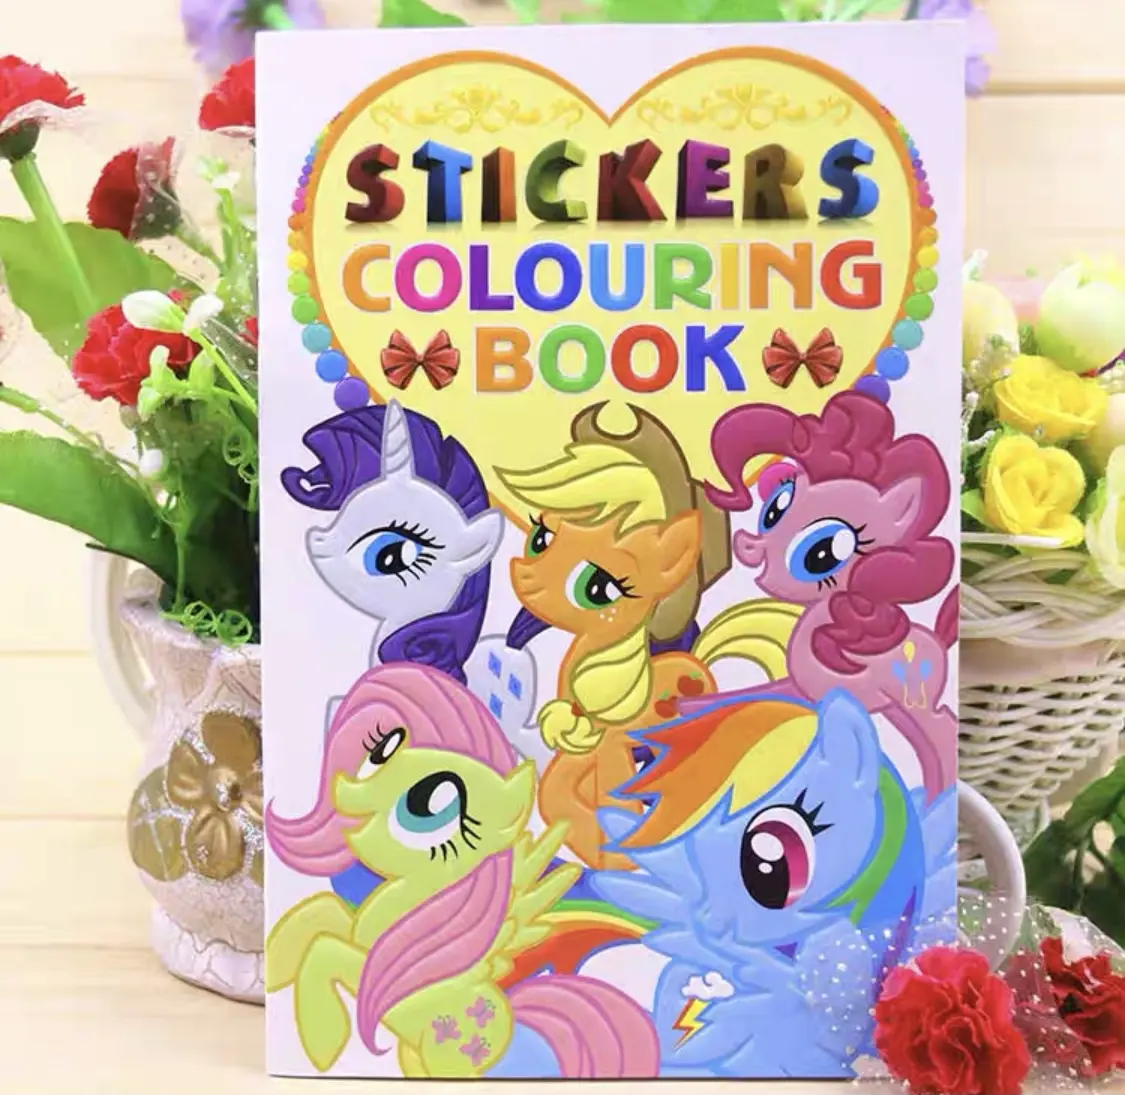 Hot Chinese Suppliers Children Books Printing Services Story Books Education Stickers Coloring Kid Book Printing